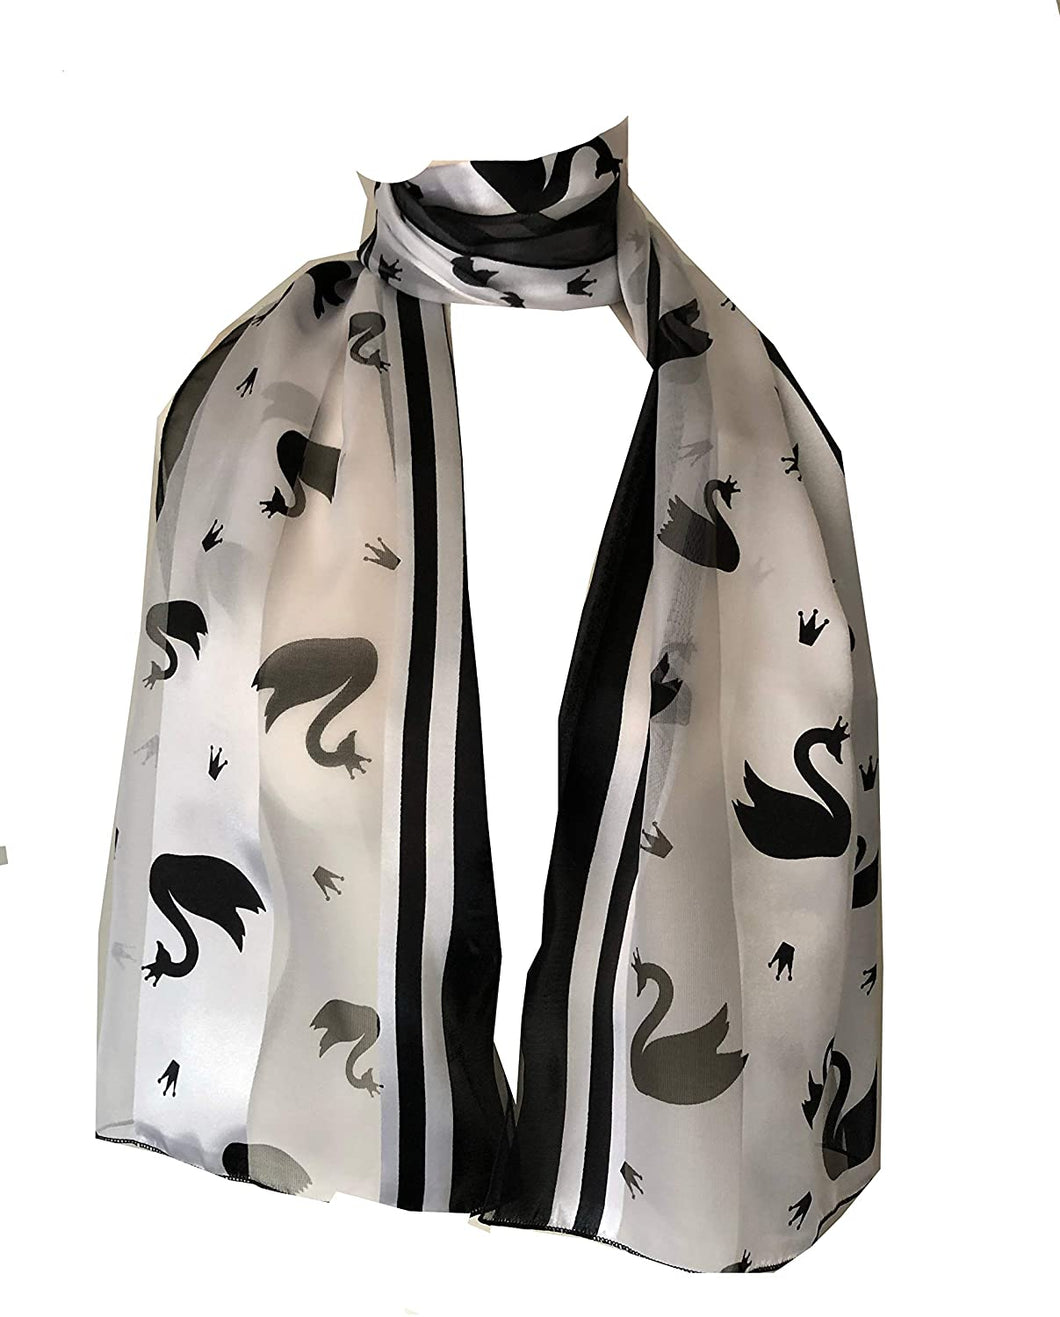 Pamper Yourself Now Swan Design Ladies Thin Pretty Scarf. Swan Gift for Women.